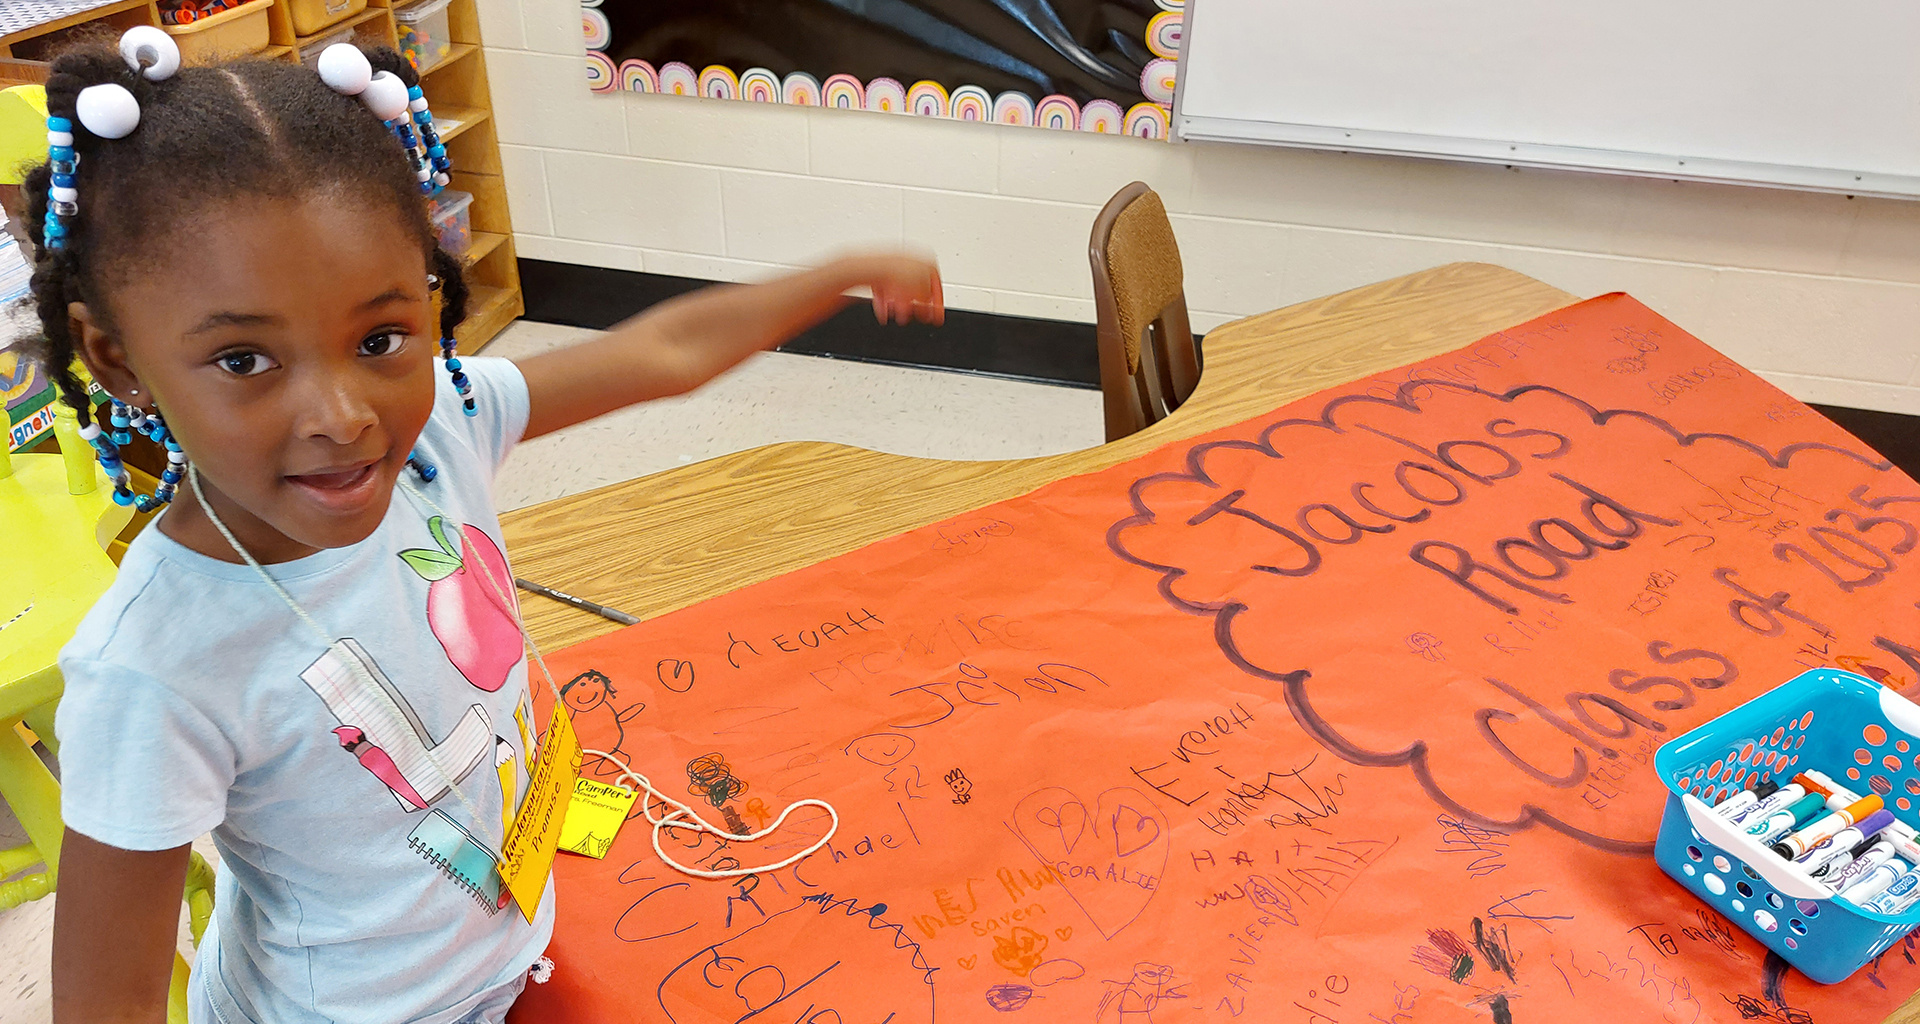 A little girl is pointing at an orange poster